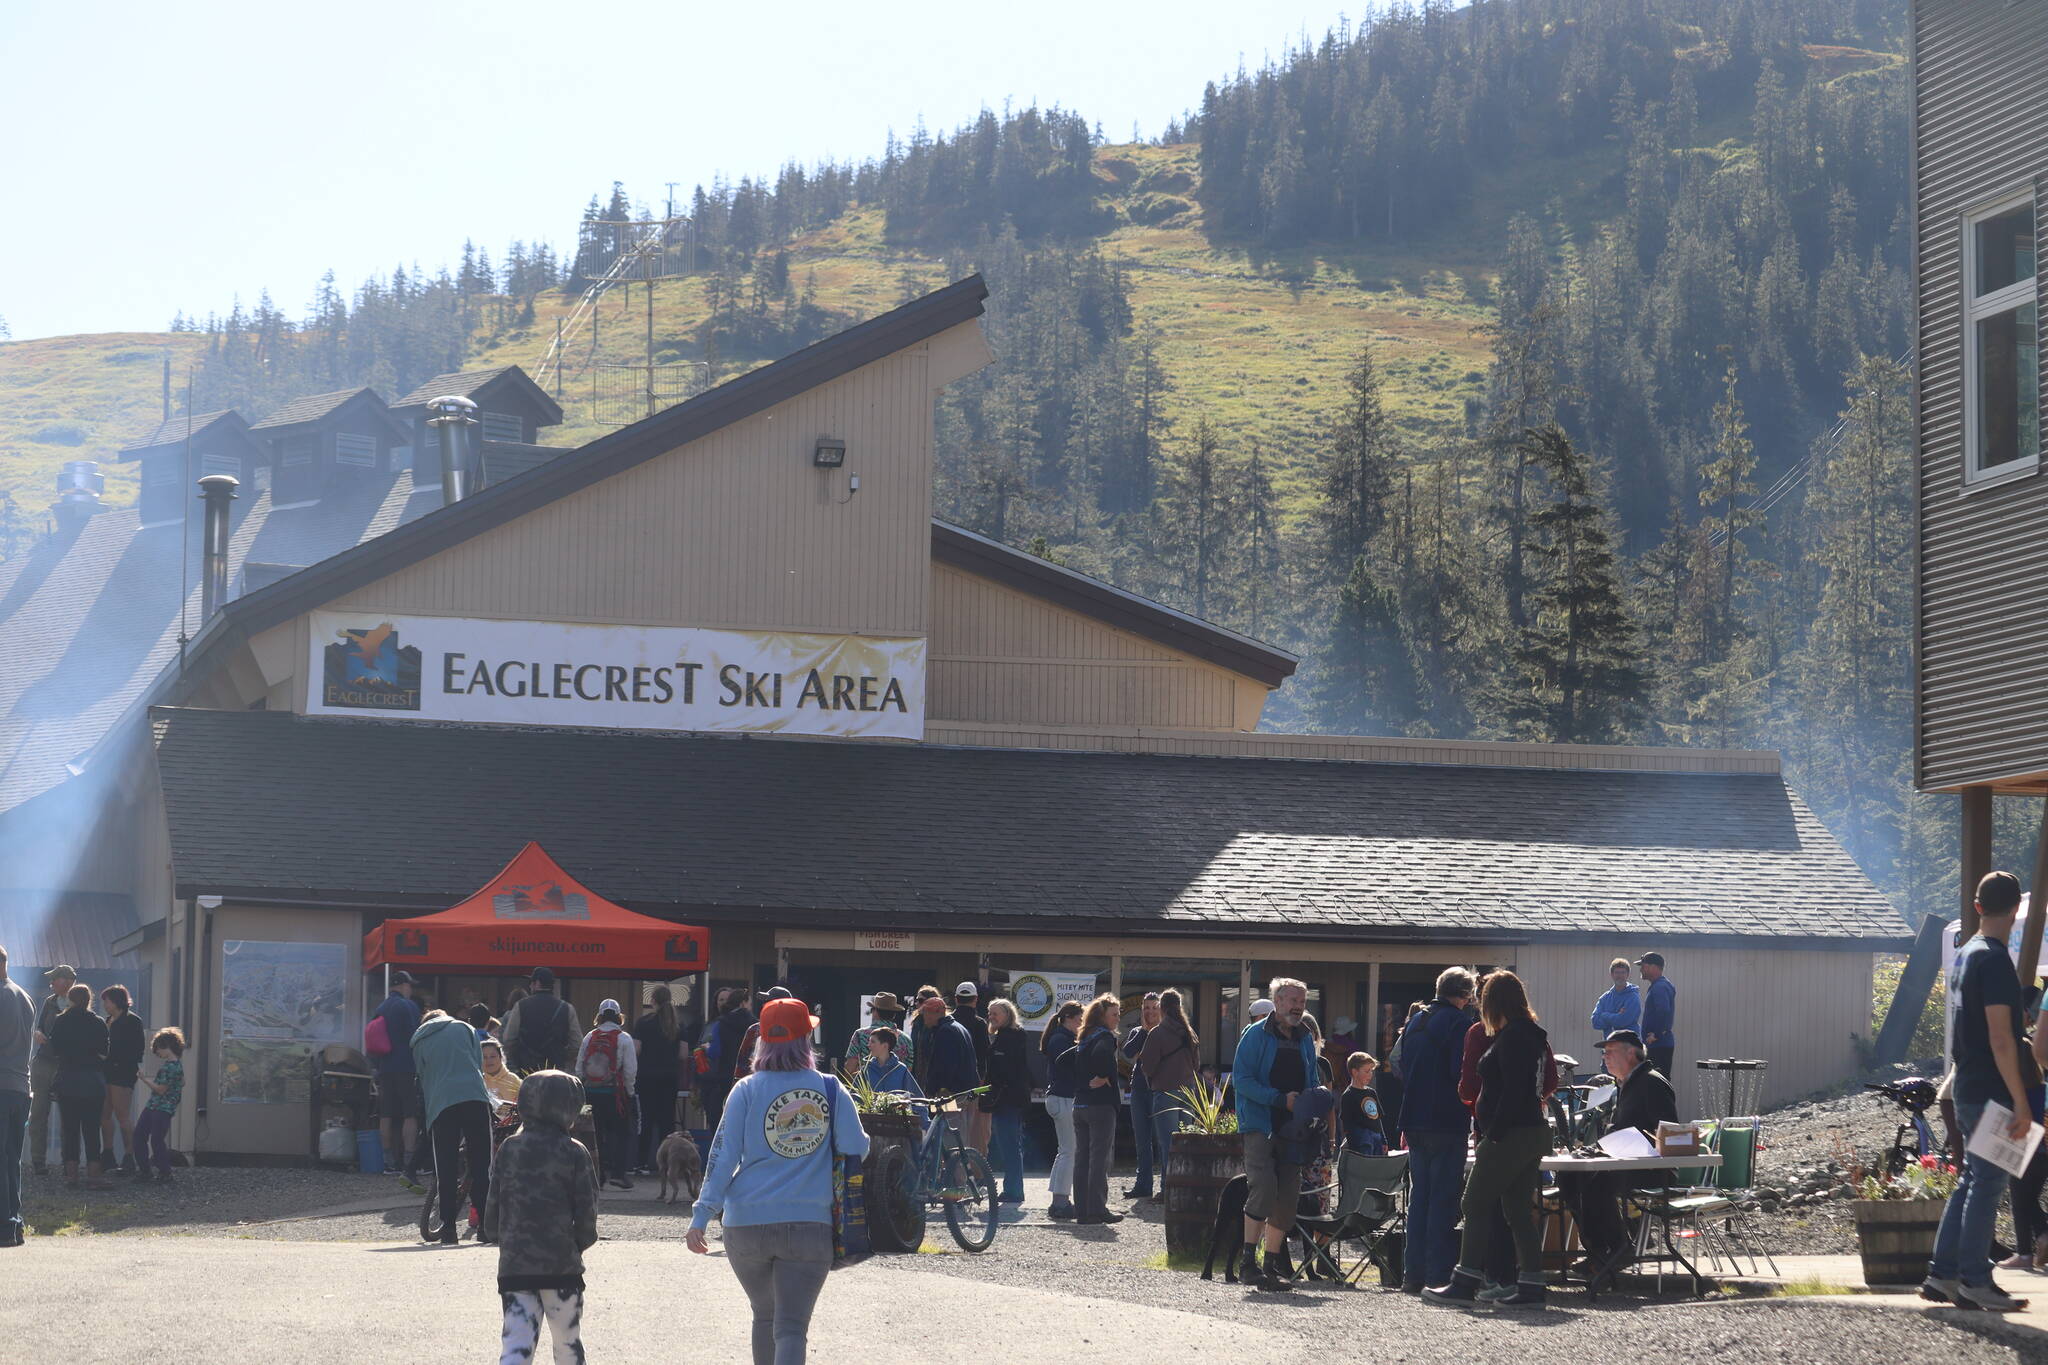 This year’s Discover Eaglecrest Day was on Saturday and saw one of the best attendance in quite some time, according to staff. Many new vendors and attractions were on site for the public, as well as a chance to purchase season passes and new gear for the winter season (Jonson Kuhn / Juneau Empire)